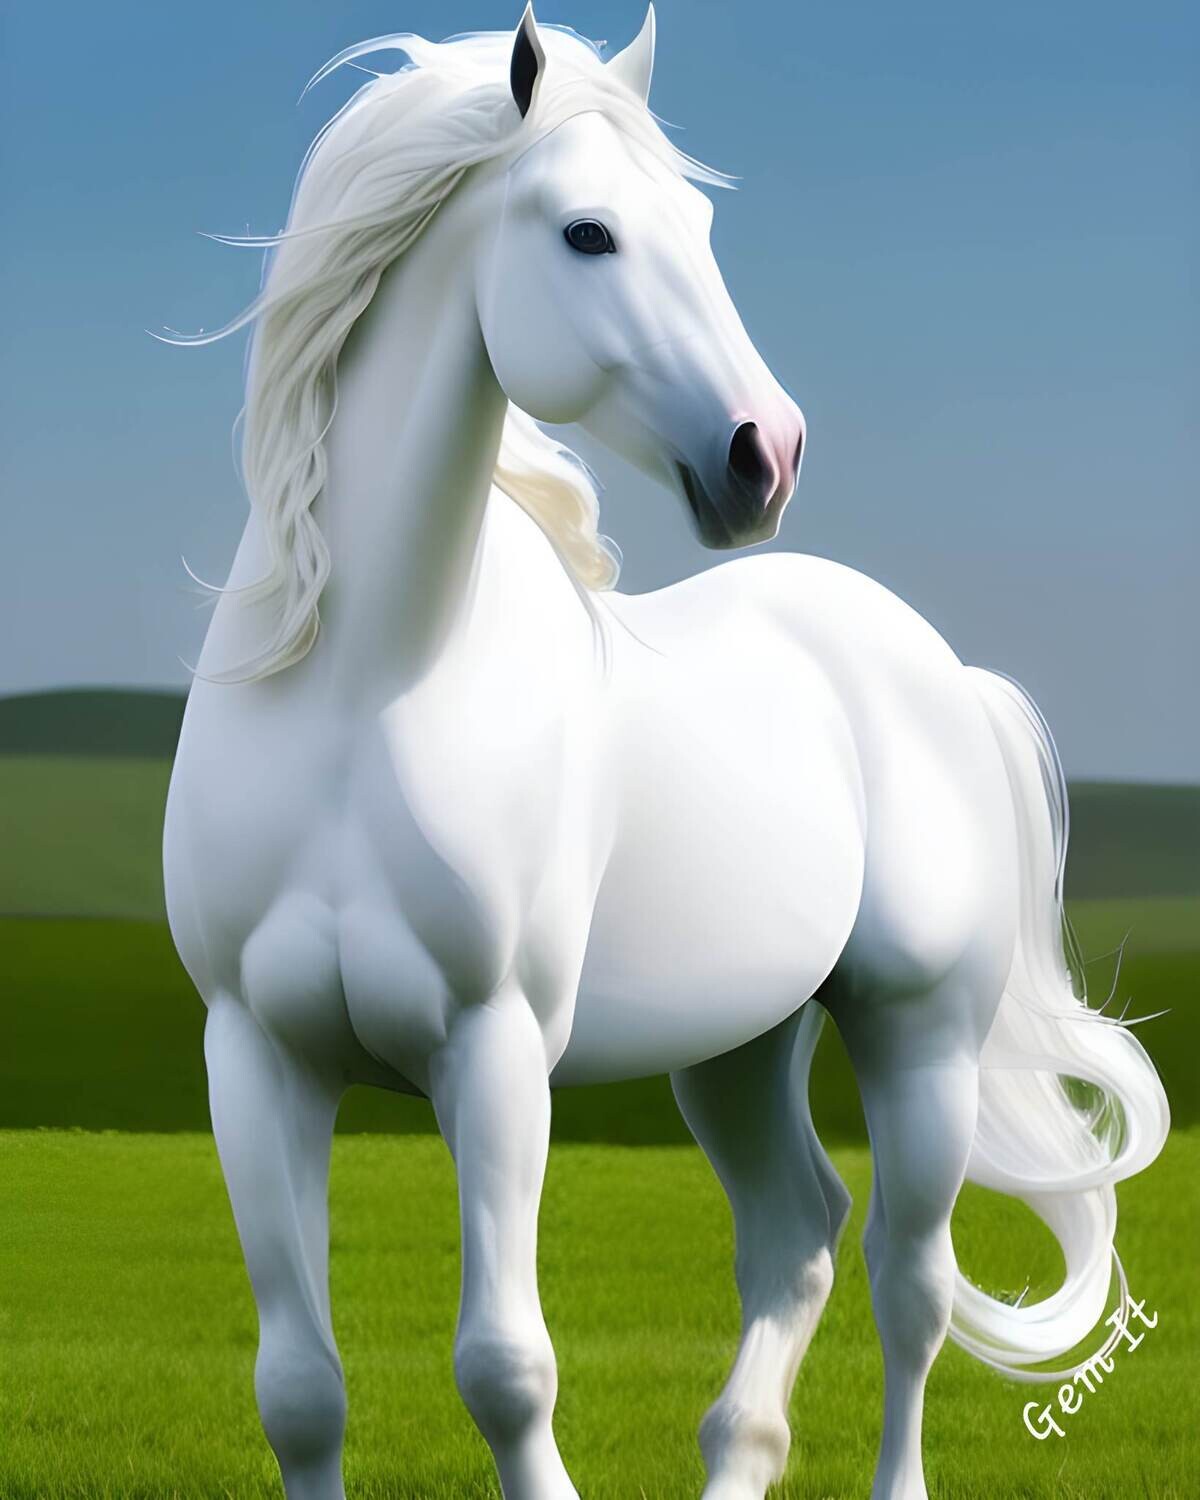 White Horse 628 - Specially ordered for you. Delivery is approximately 4 - 6 weeks.